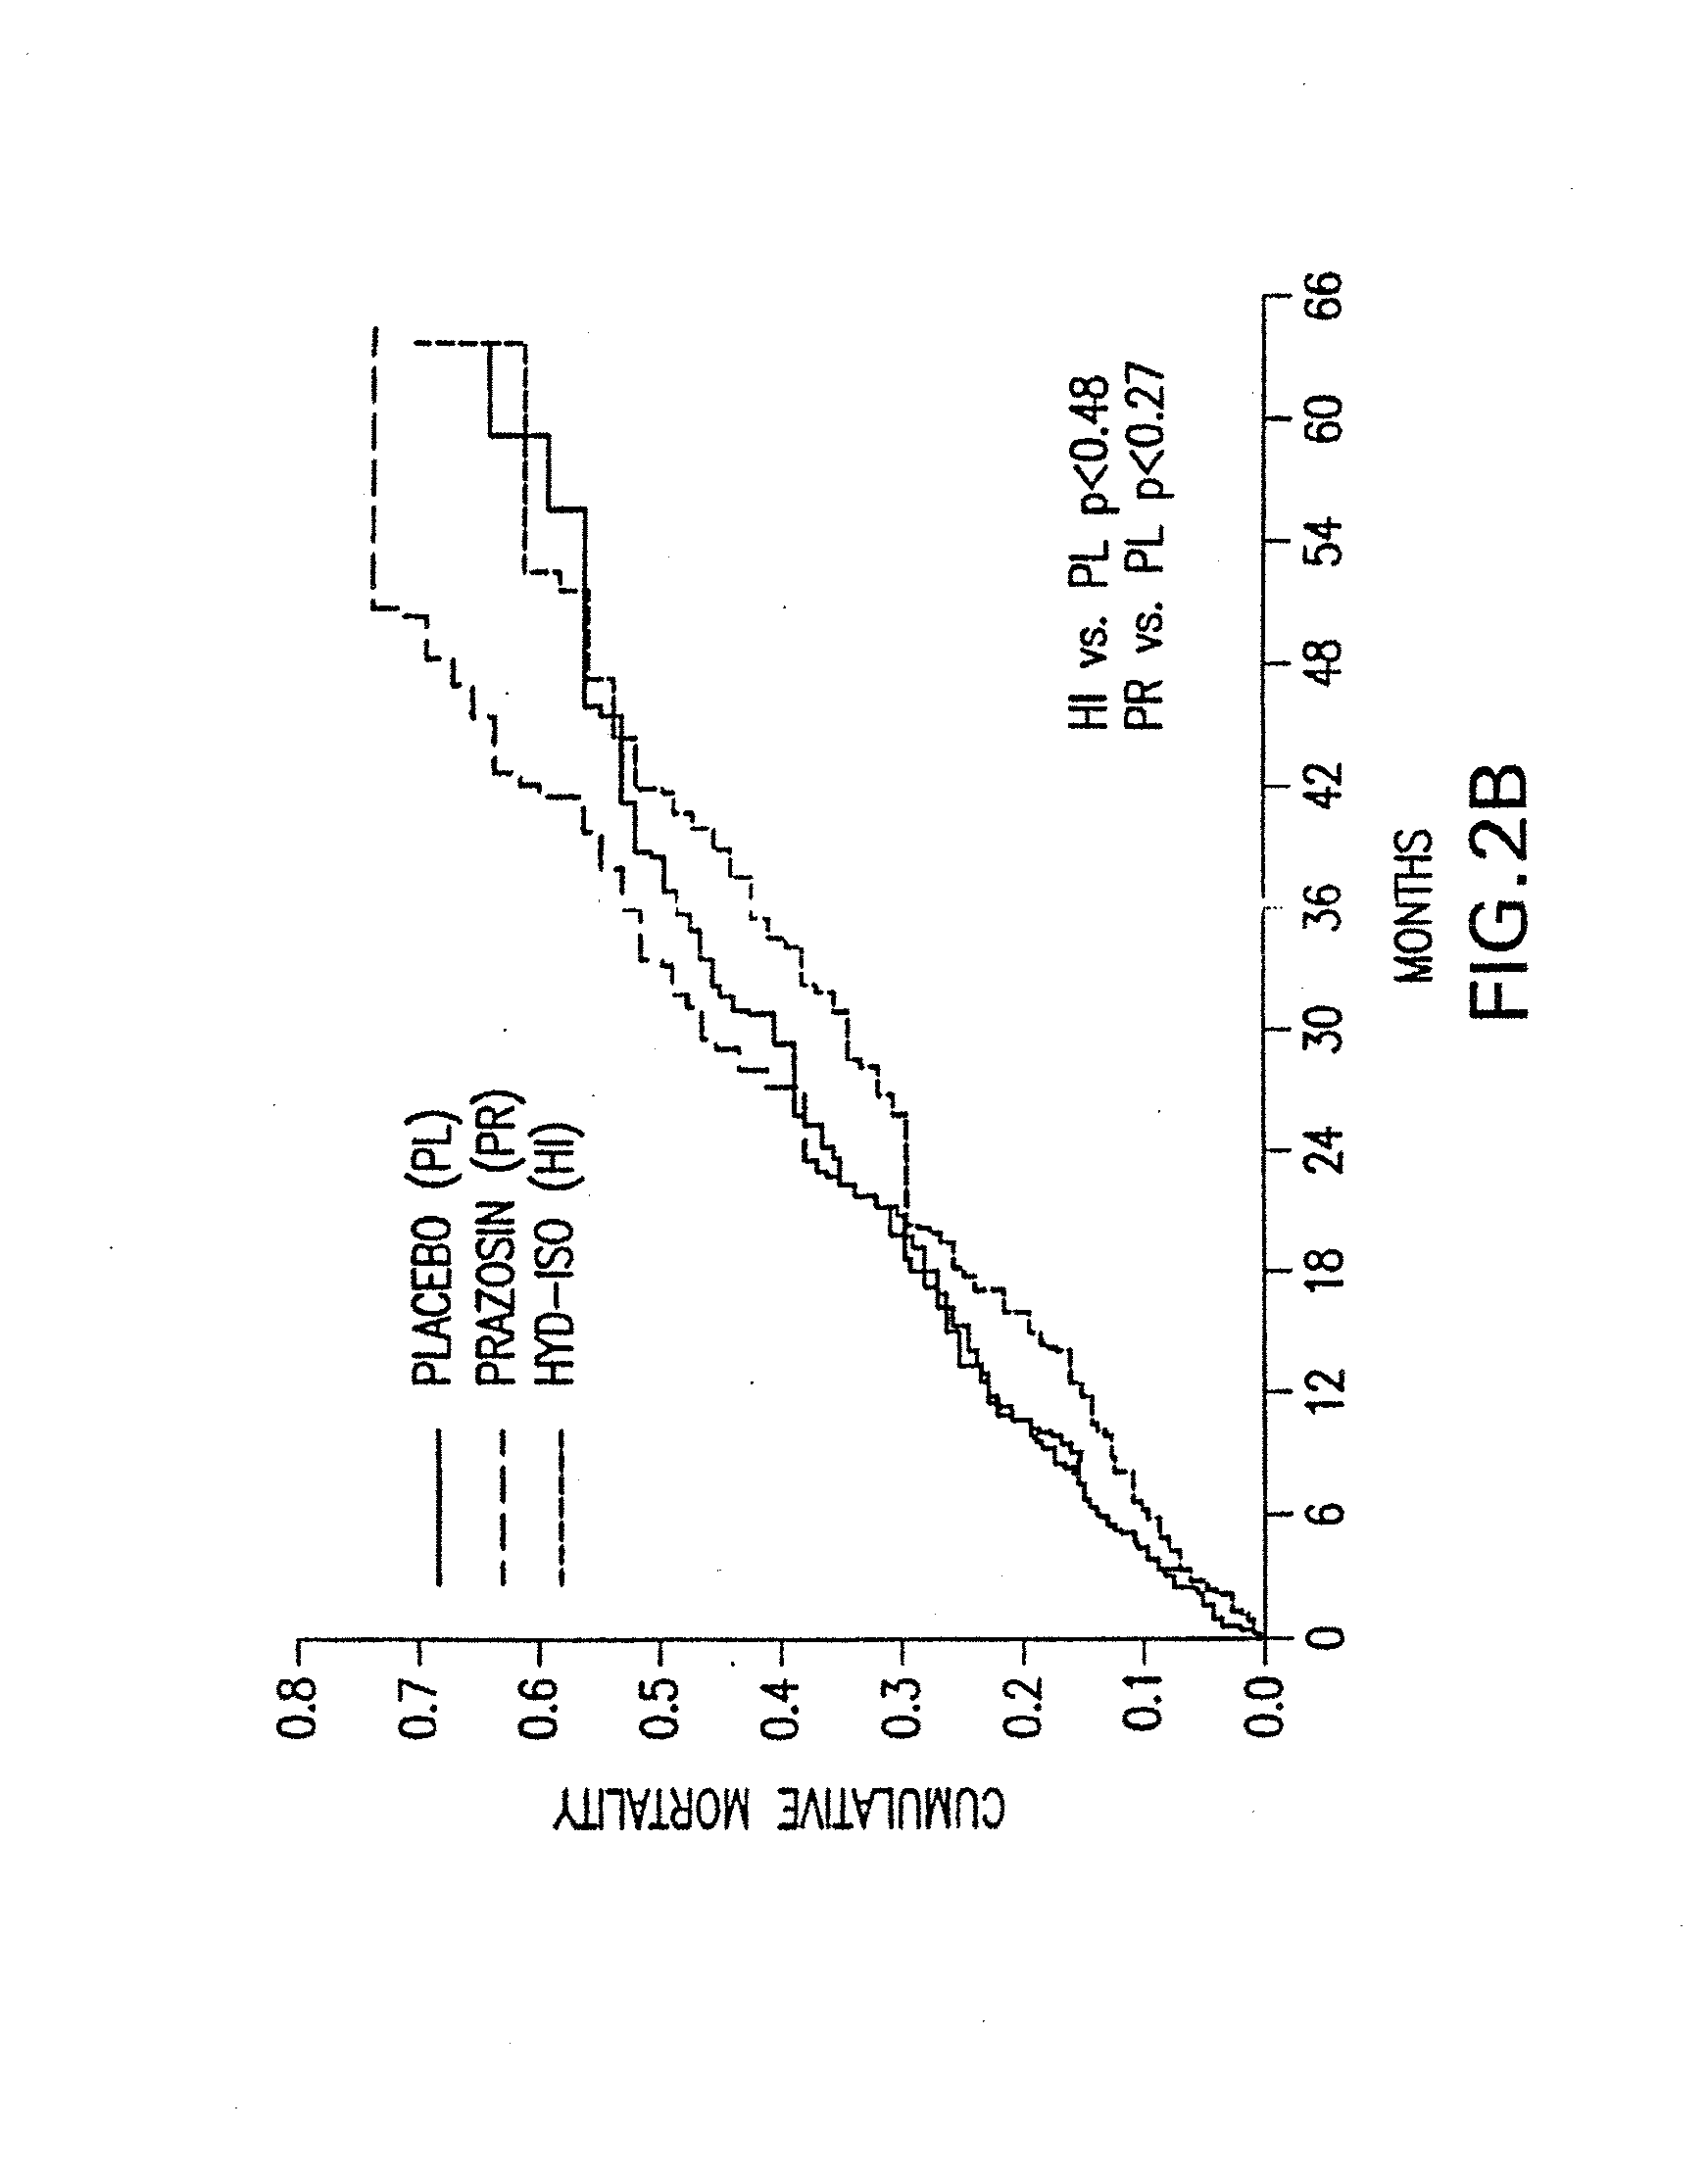 Kits of hydralazine compounds and isosorbide dinitrate and/or isosorbide mononitrate